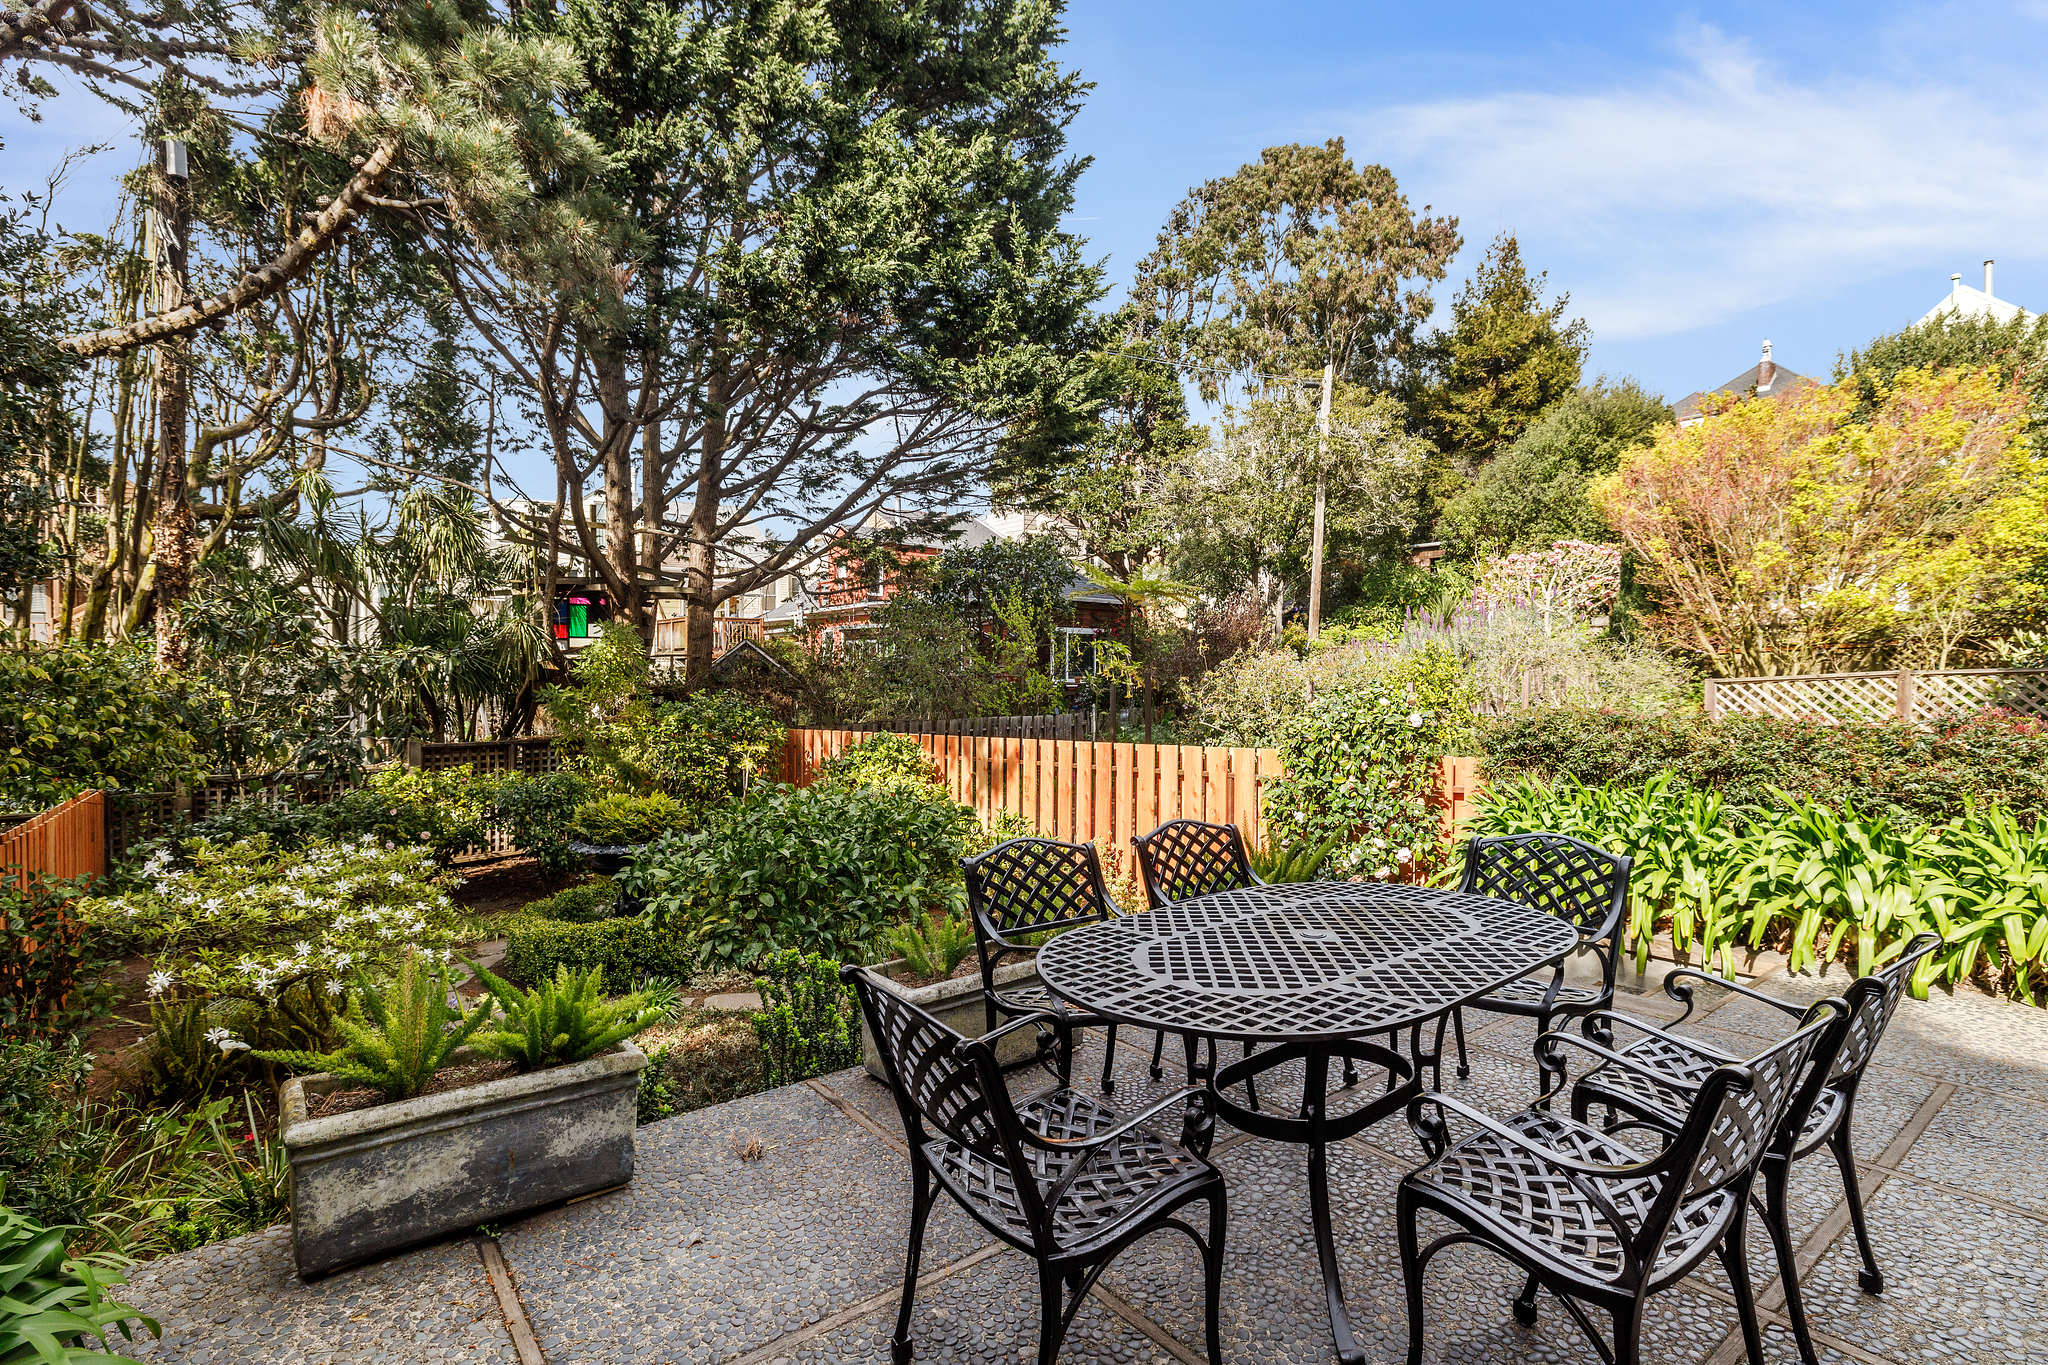 Property Photo: Out door dining area, with a view of a garden area and trees